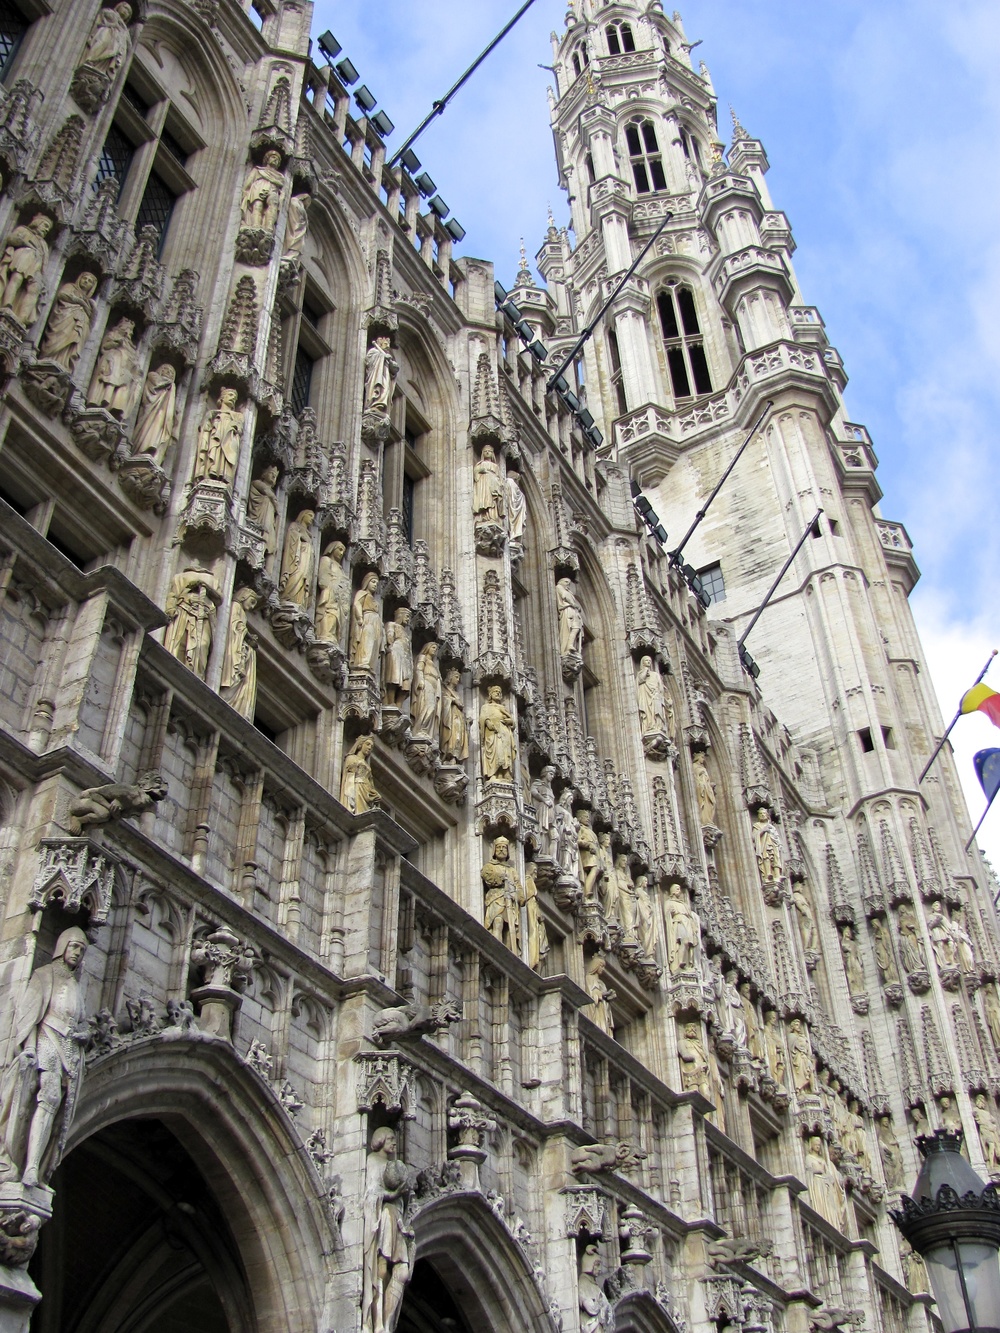  Hotel de Ville de Bruxelles - formerly Town Hall, 15th Century Gothic, Grand Place, Old City Brussels, Belgium, VHS 2010 